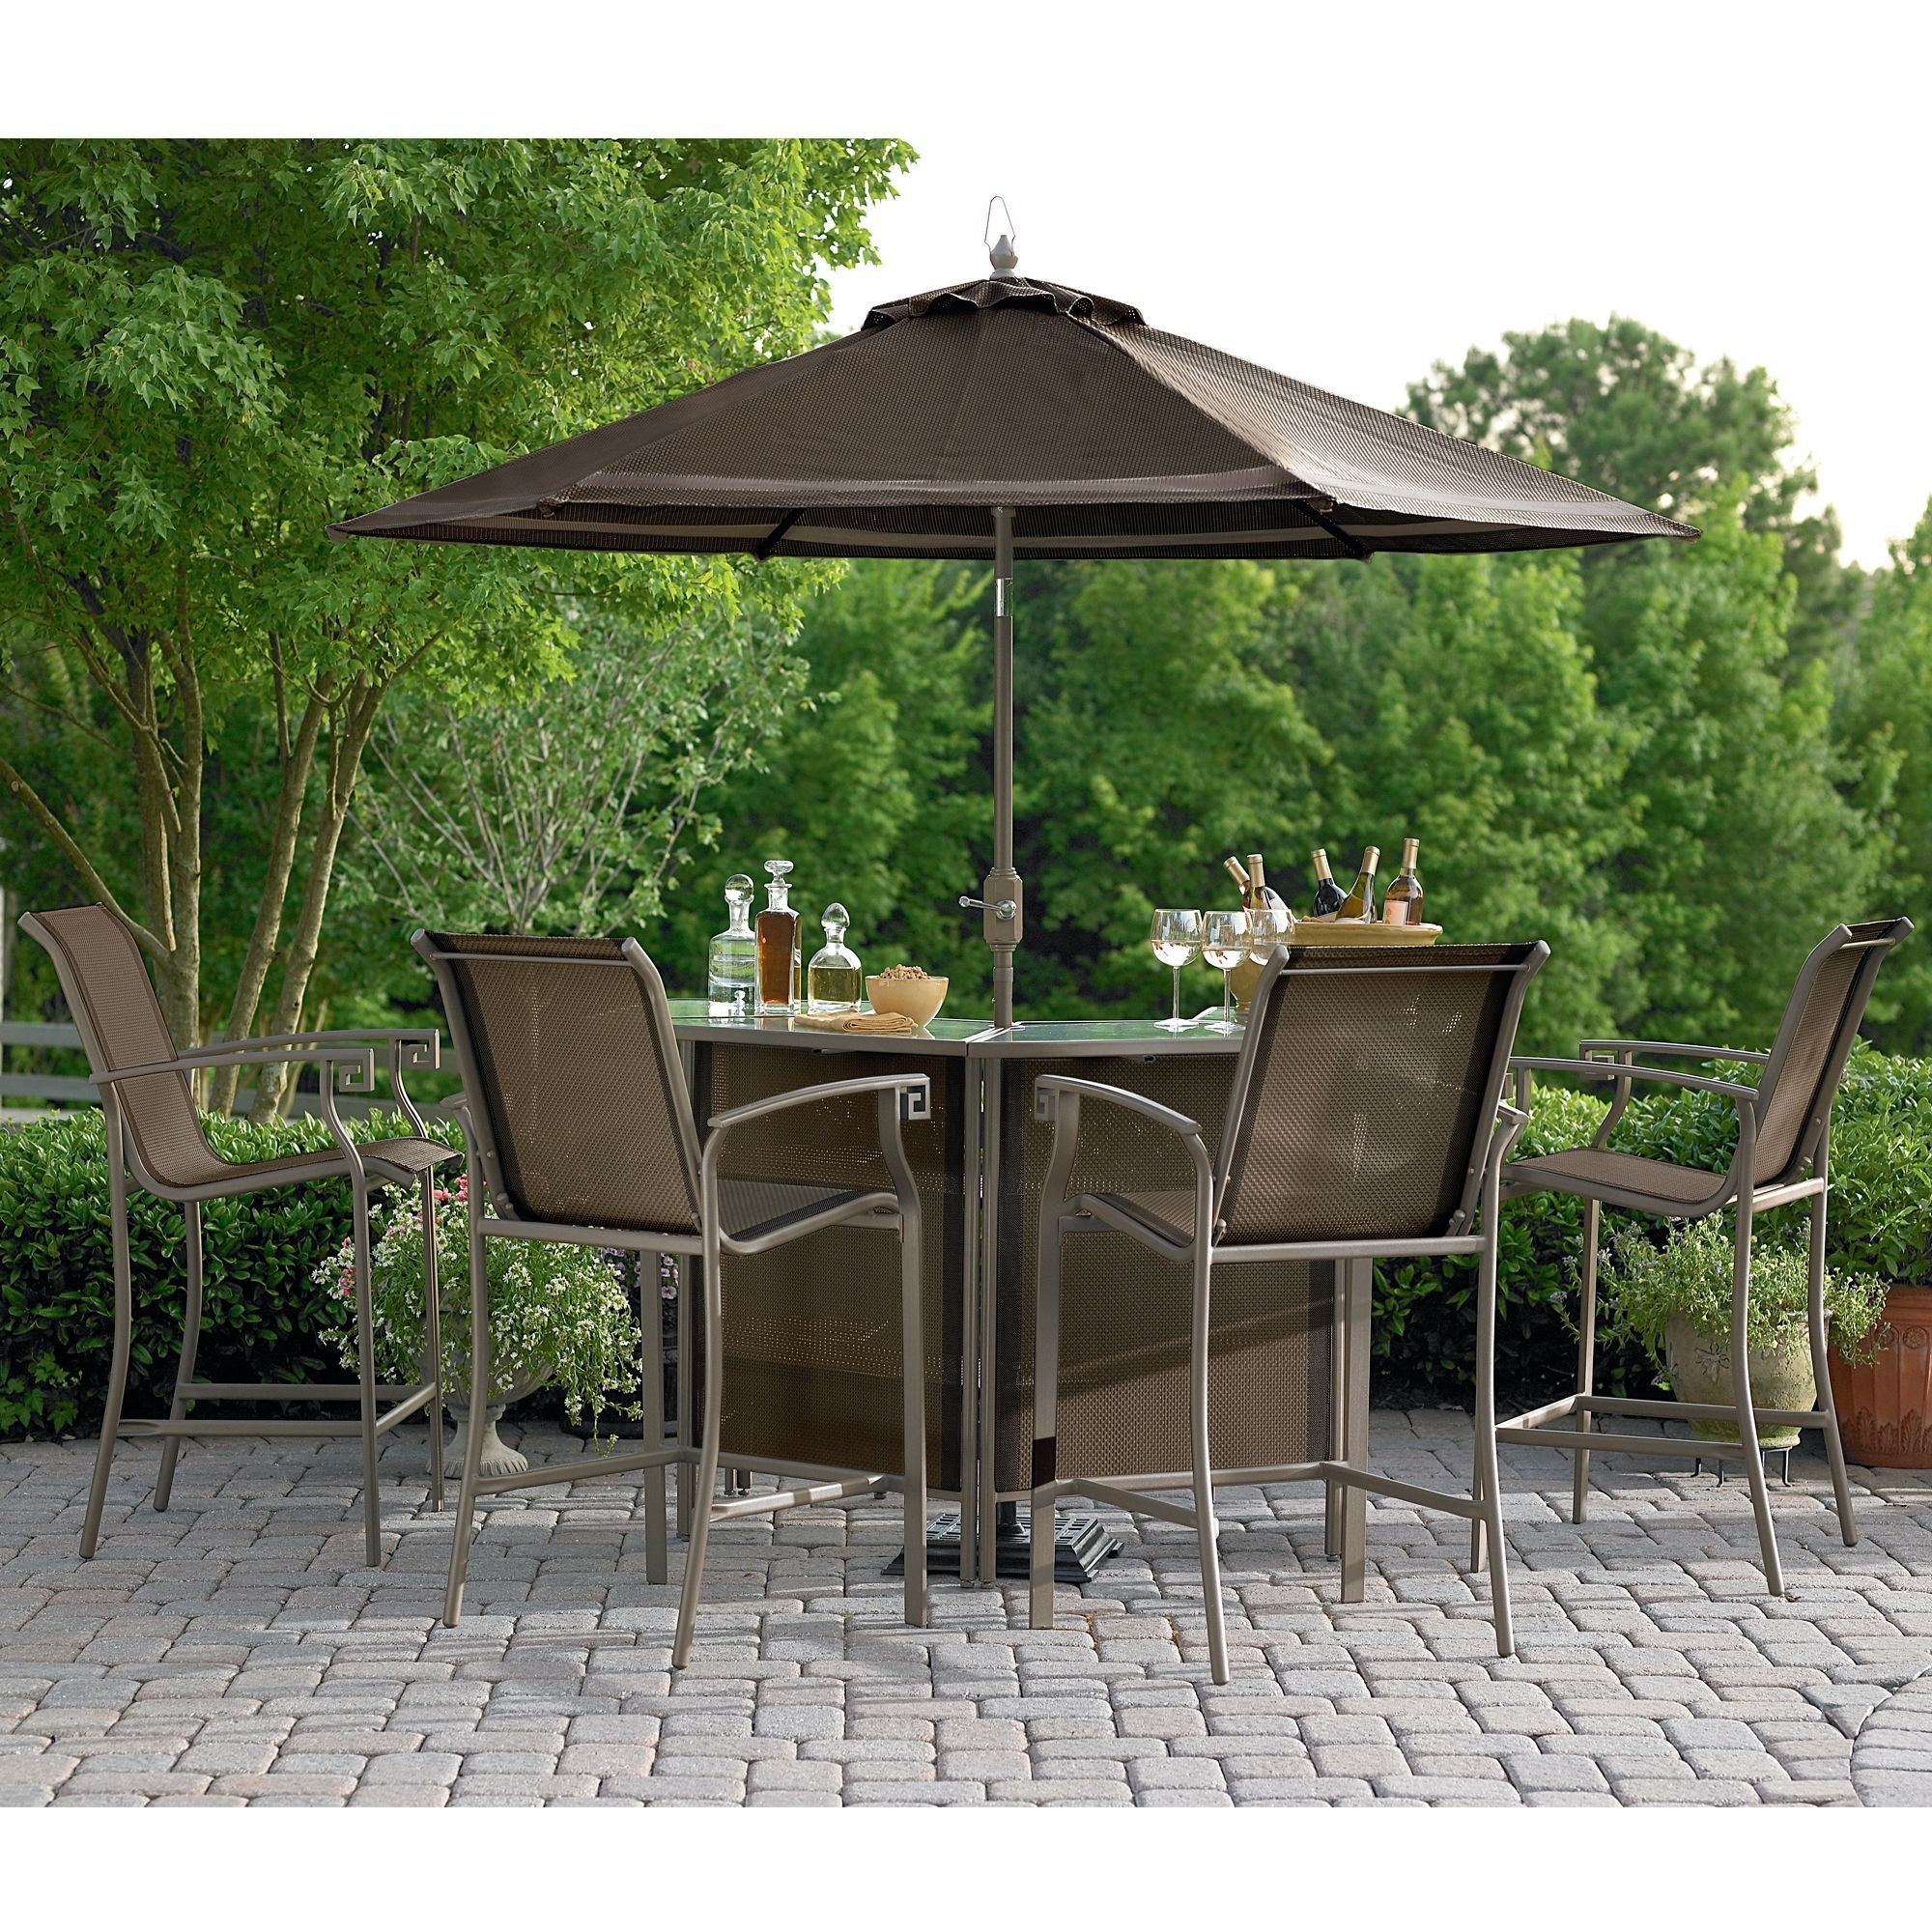 Modern outdoor ideas home depot bar inch round patio table